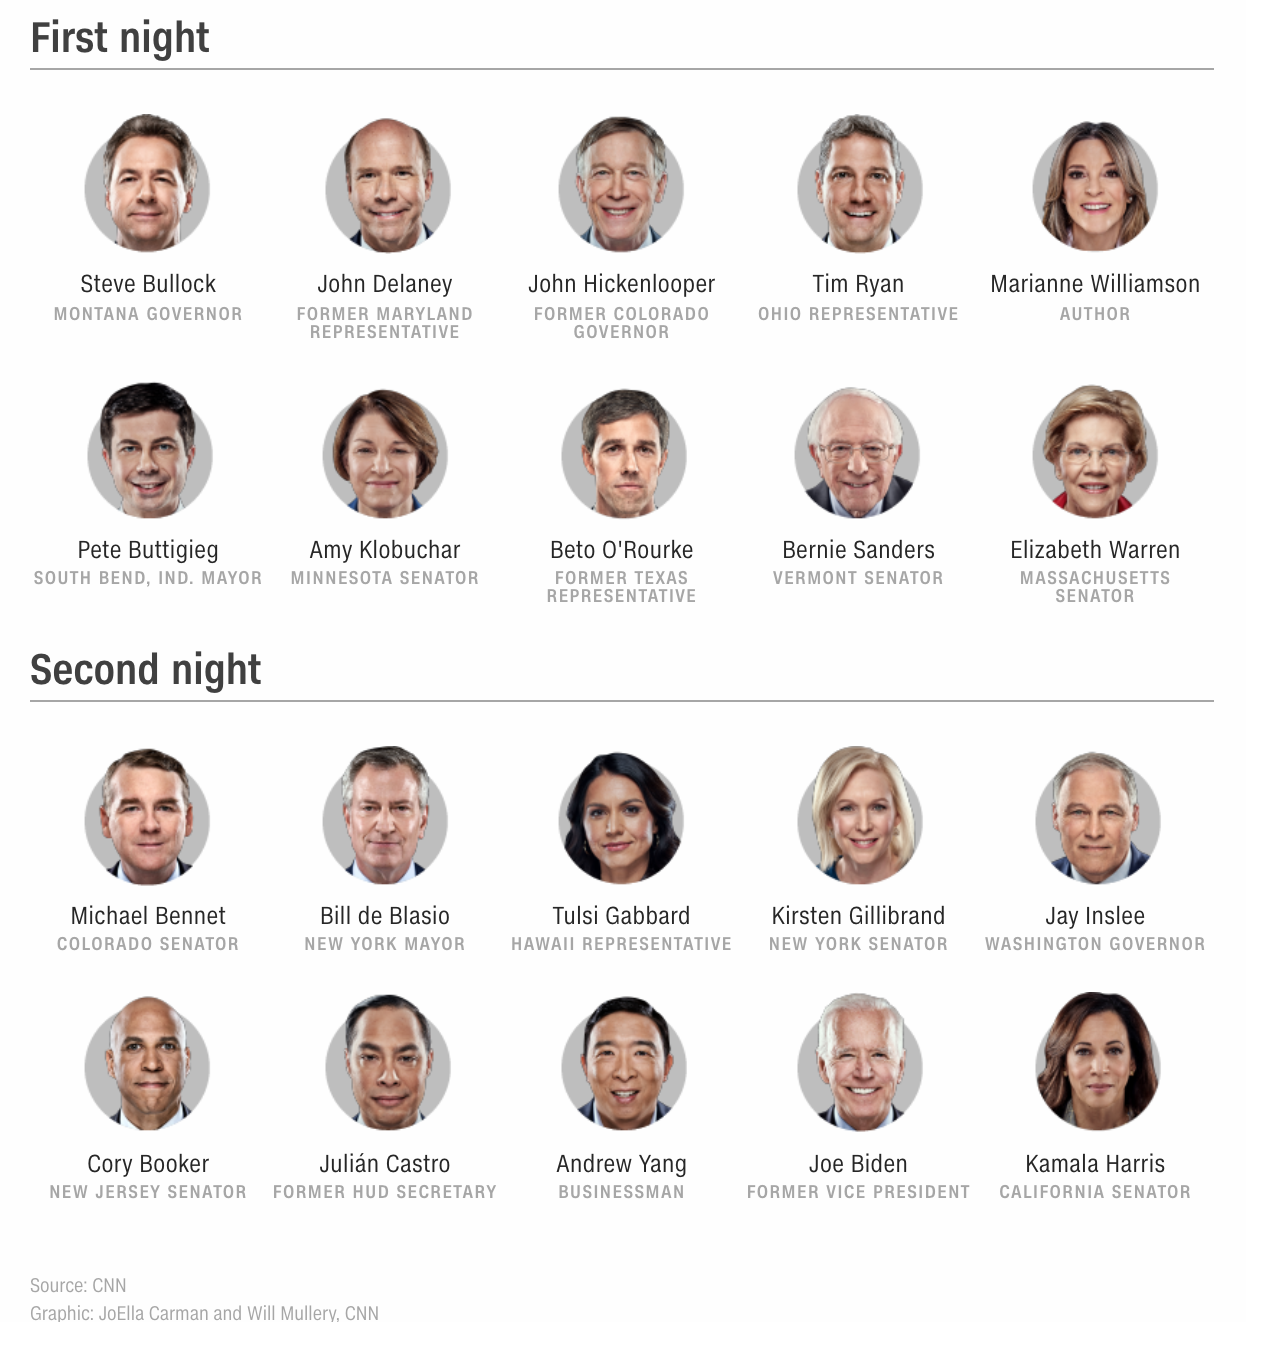 Here are the podium positions for CNN's Democratic debates